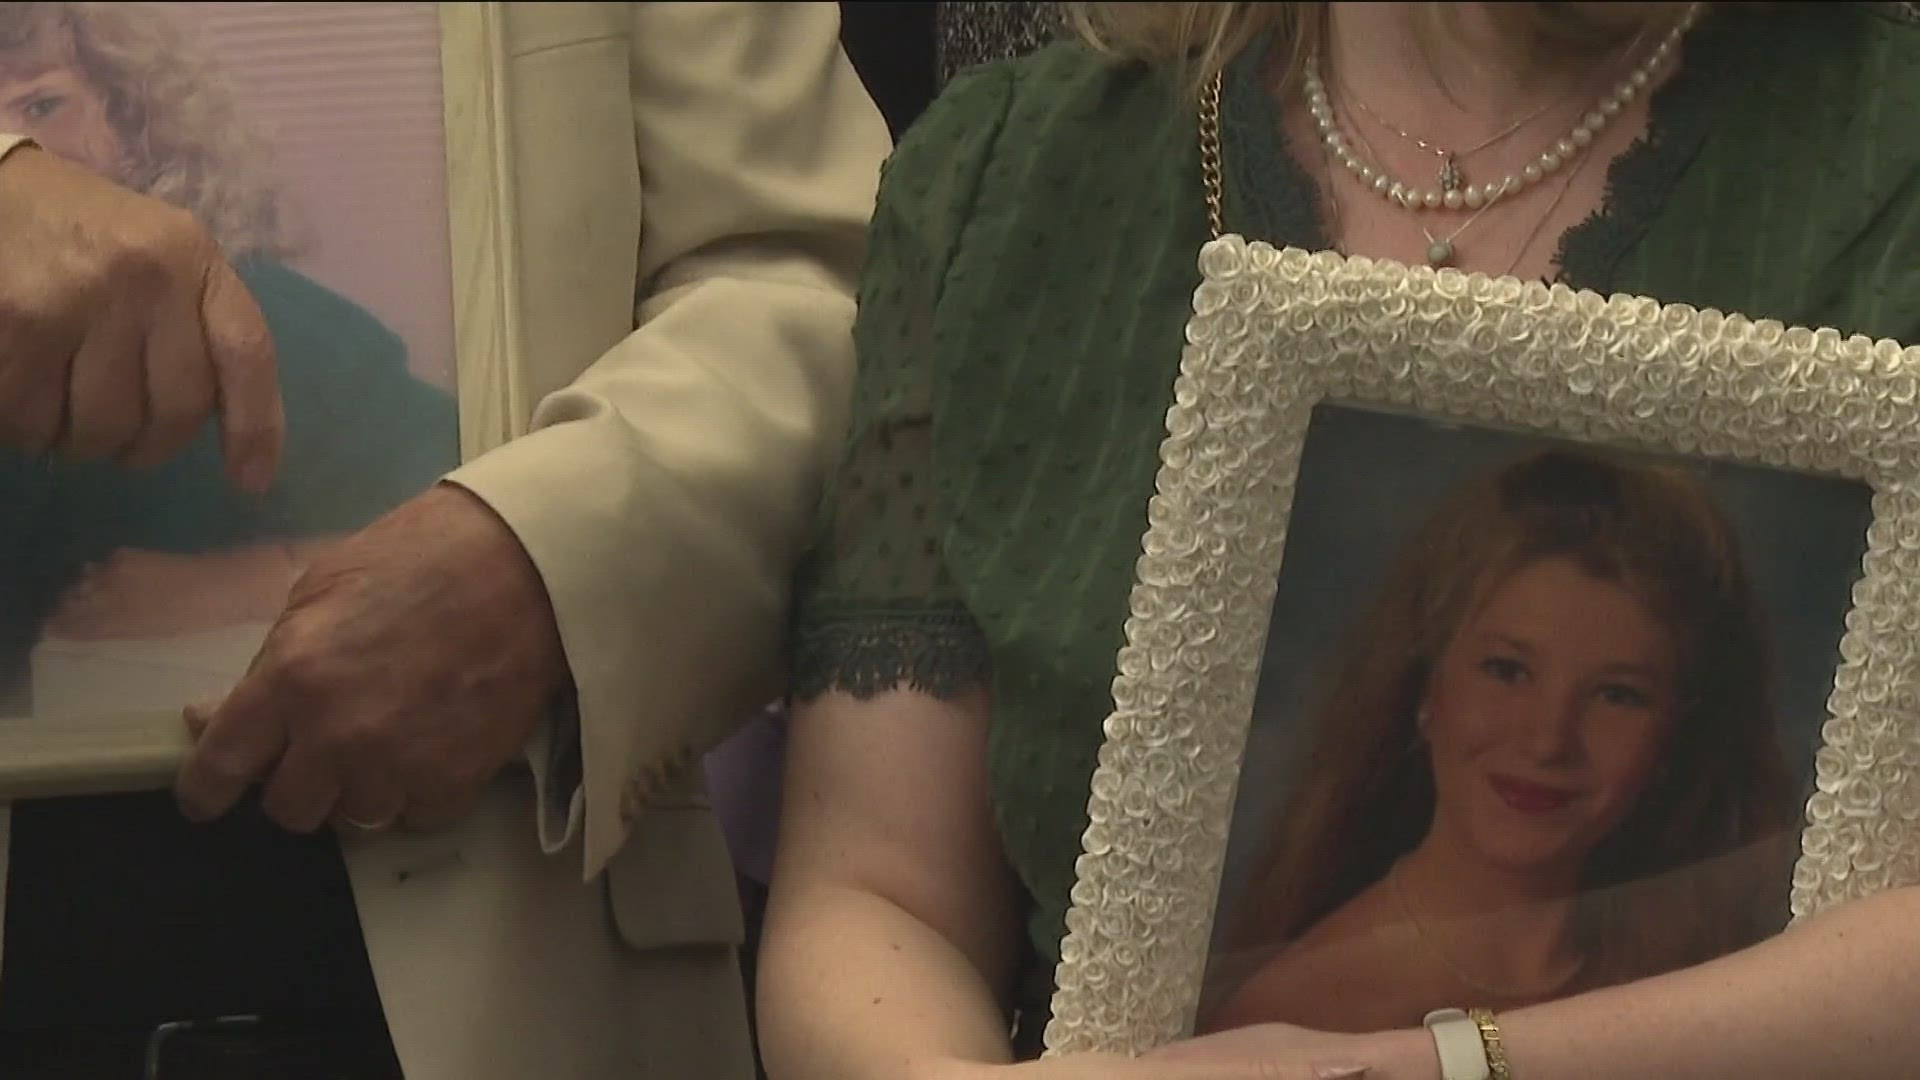 It was a hope that the families of Tara Louise Baker and Rhonda Sue Coleman, for which the act was named, held on to.